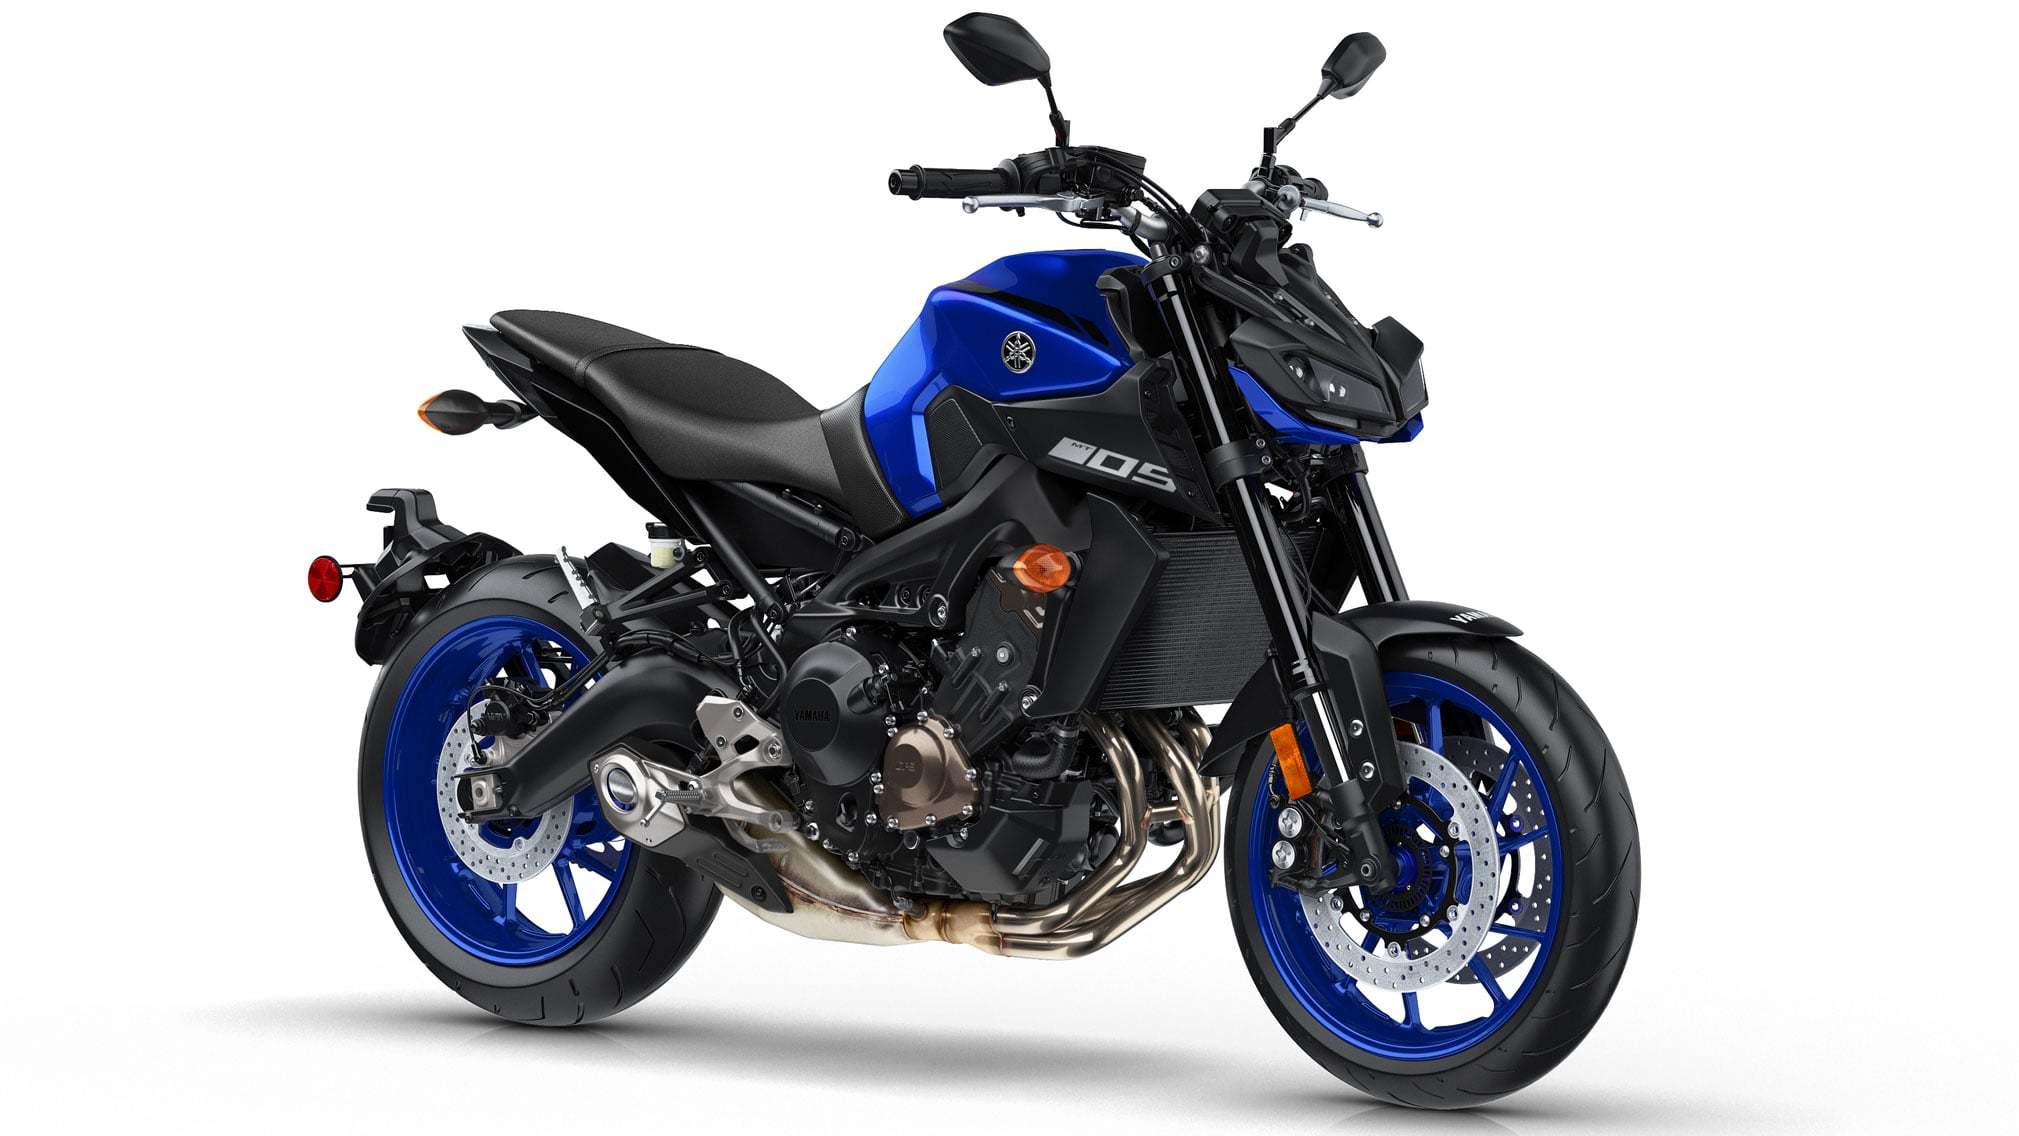 2019 Yamaha MT09 in Guelph, ON TWO WHEEL MOTORSPORT 43383048